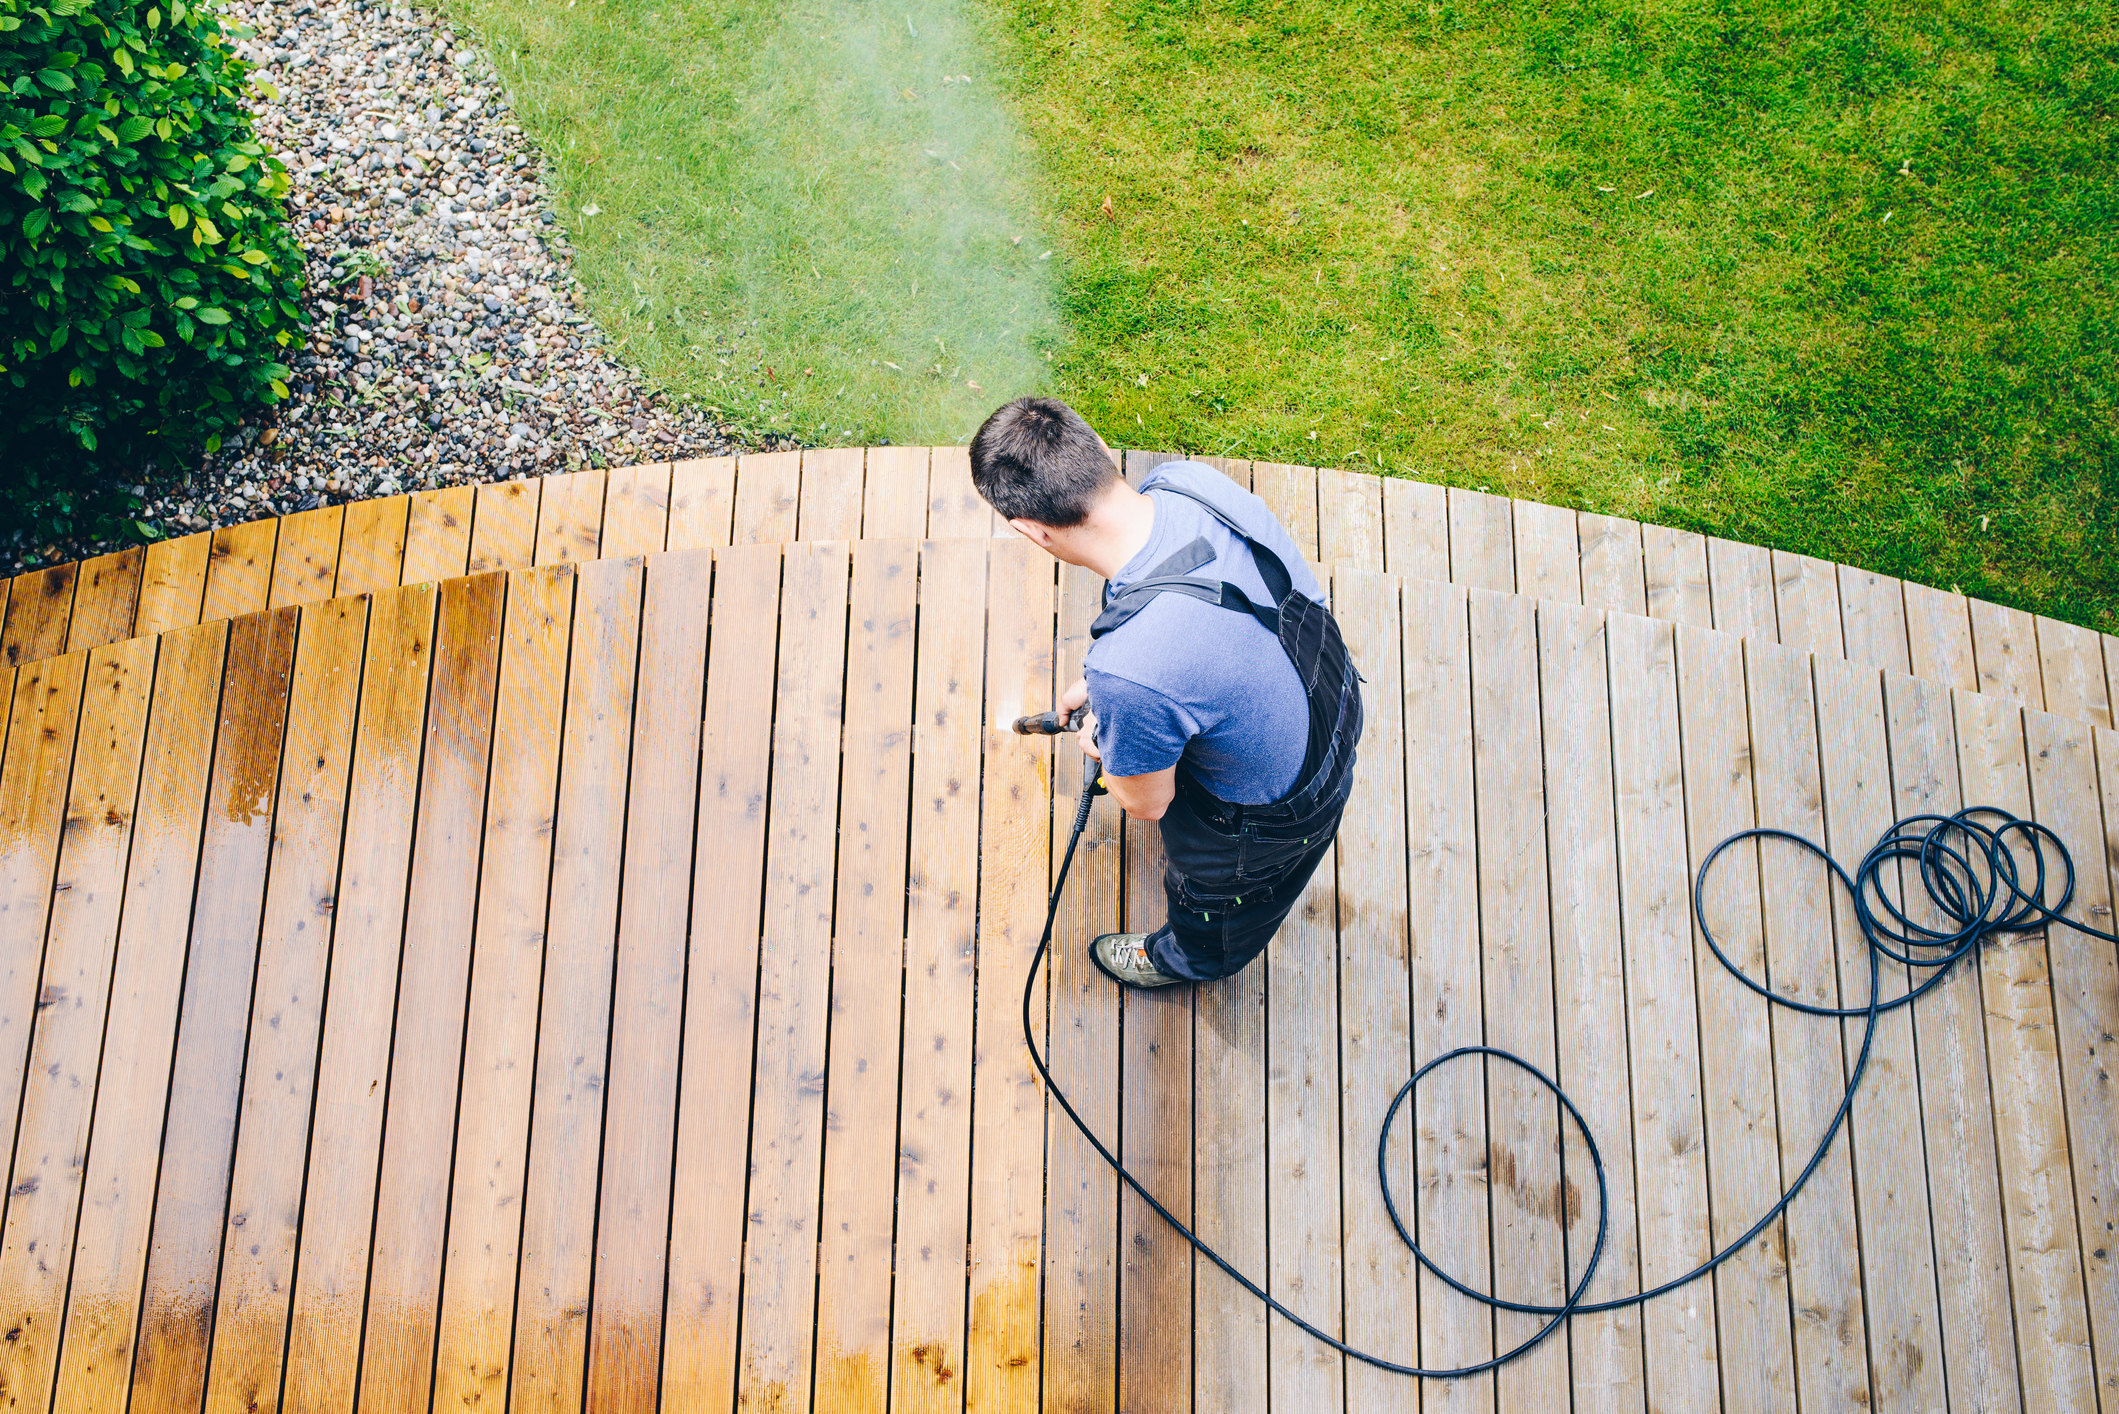 A man is power-washing his deck